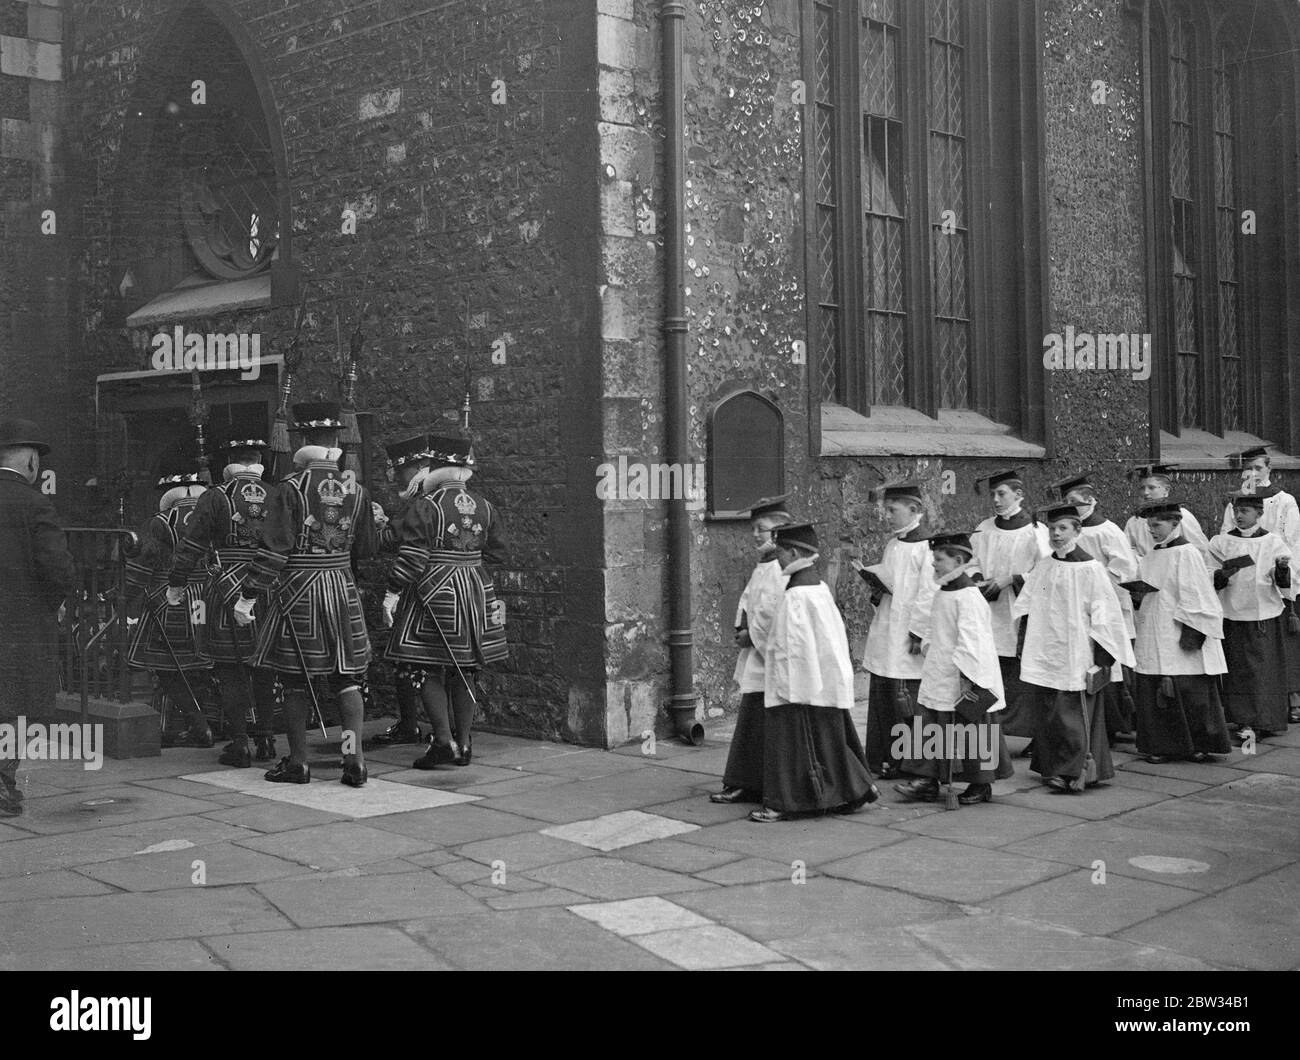 Easter Sunday inspection of Beefeaters at the Tower of London . Lieut Col Dan Burgess , VC Governor of the Tower of London inspected the Yoemen of the Guard , in their Tudor uniforms , in the courtyard of the Tower before attending Easter Sunday service at St Peter and Vinacular Church . The Beefeaters marching to church after the inspection . 27 March 1932 Stock Photo